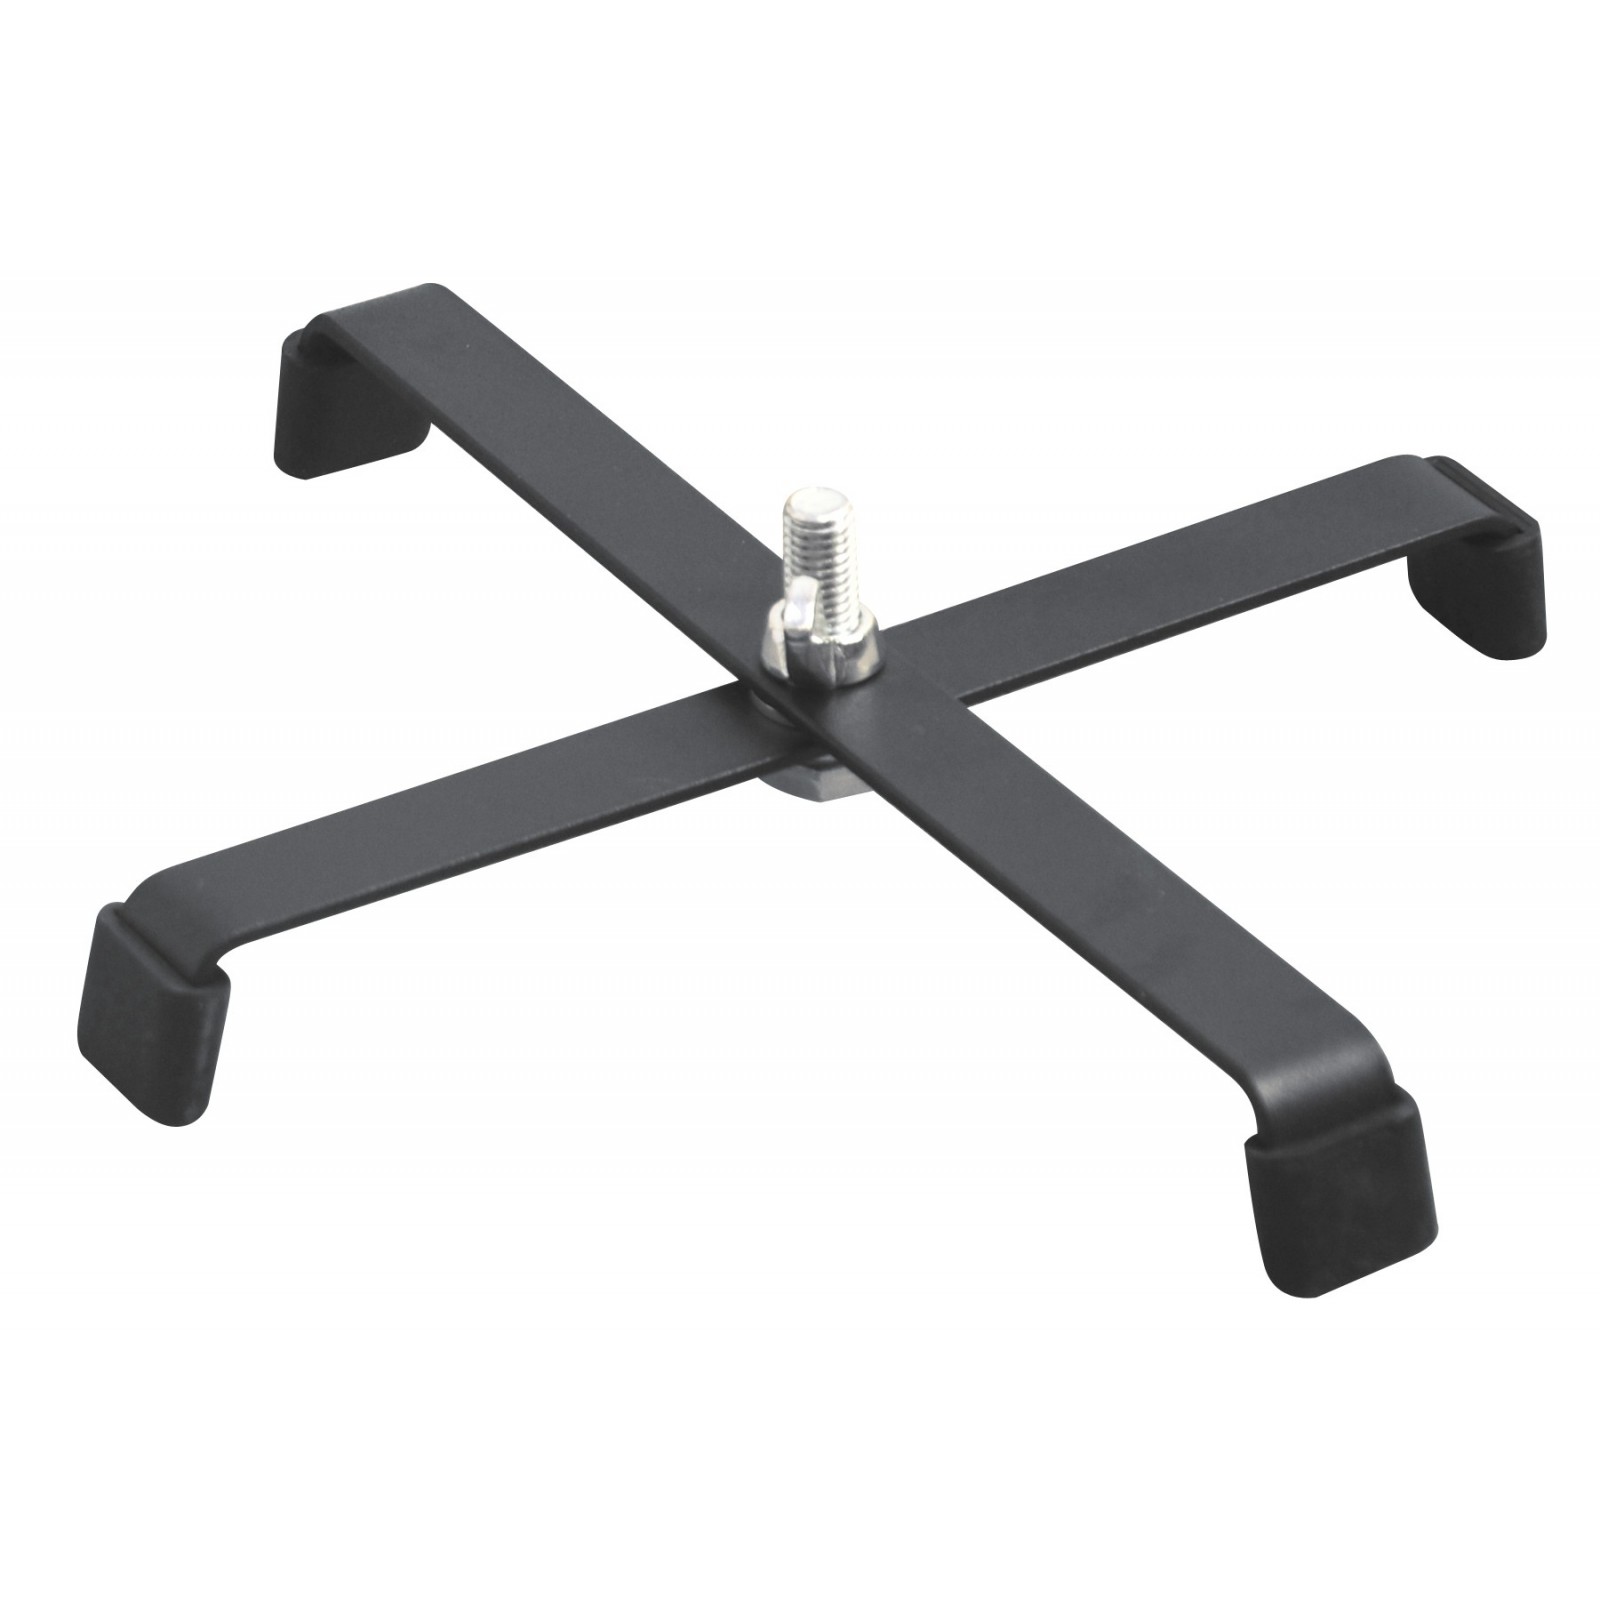 JB Systems - Projector floor stand